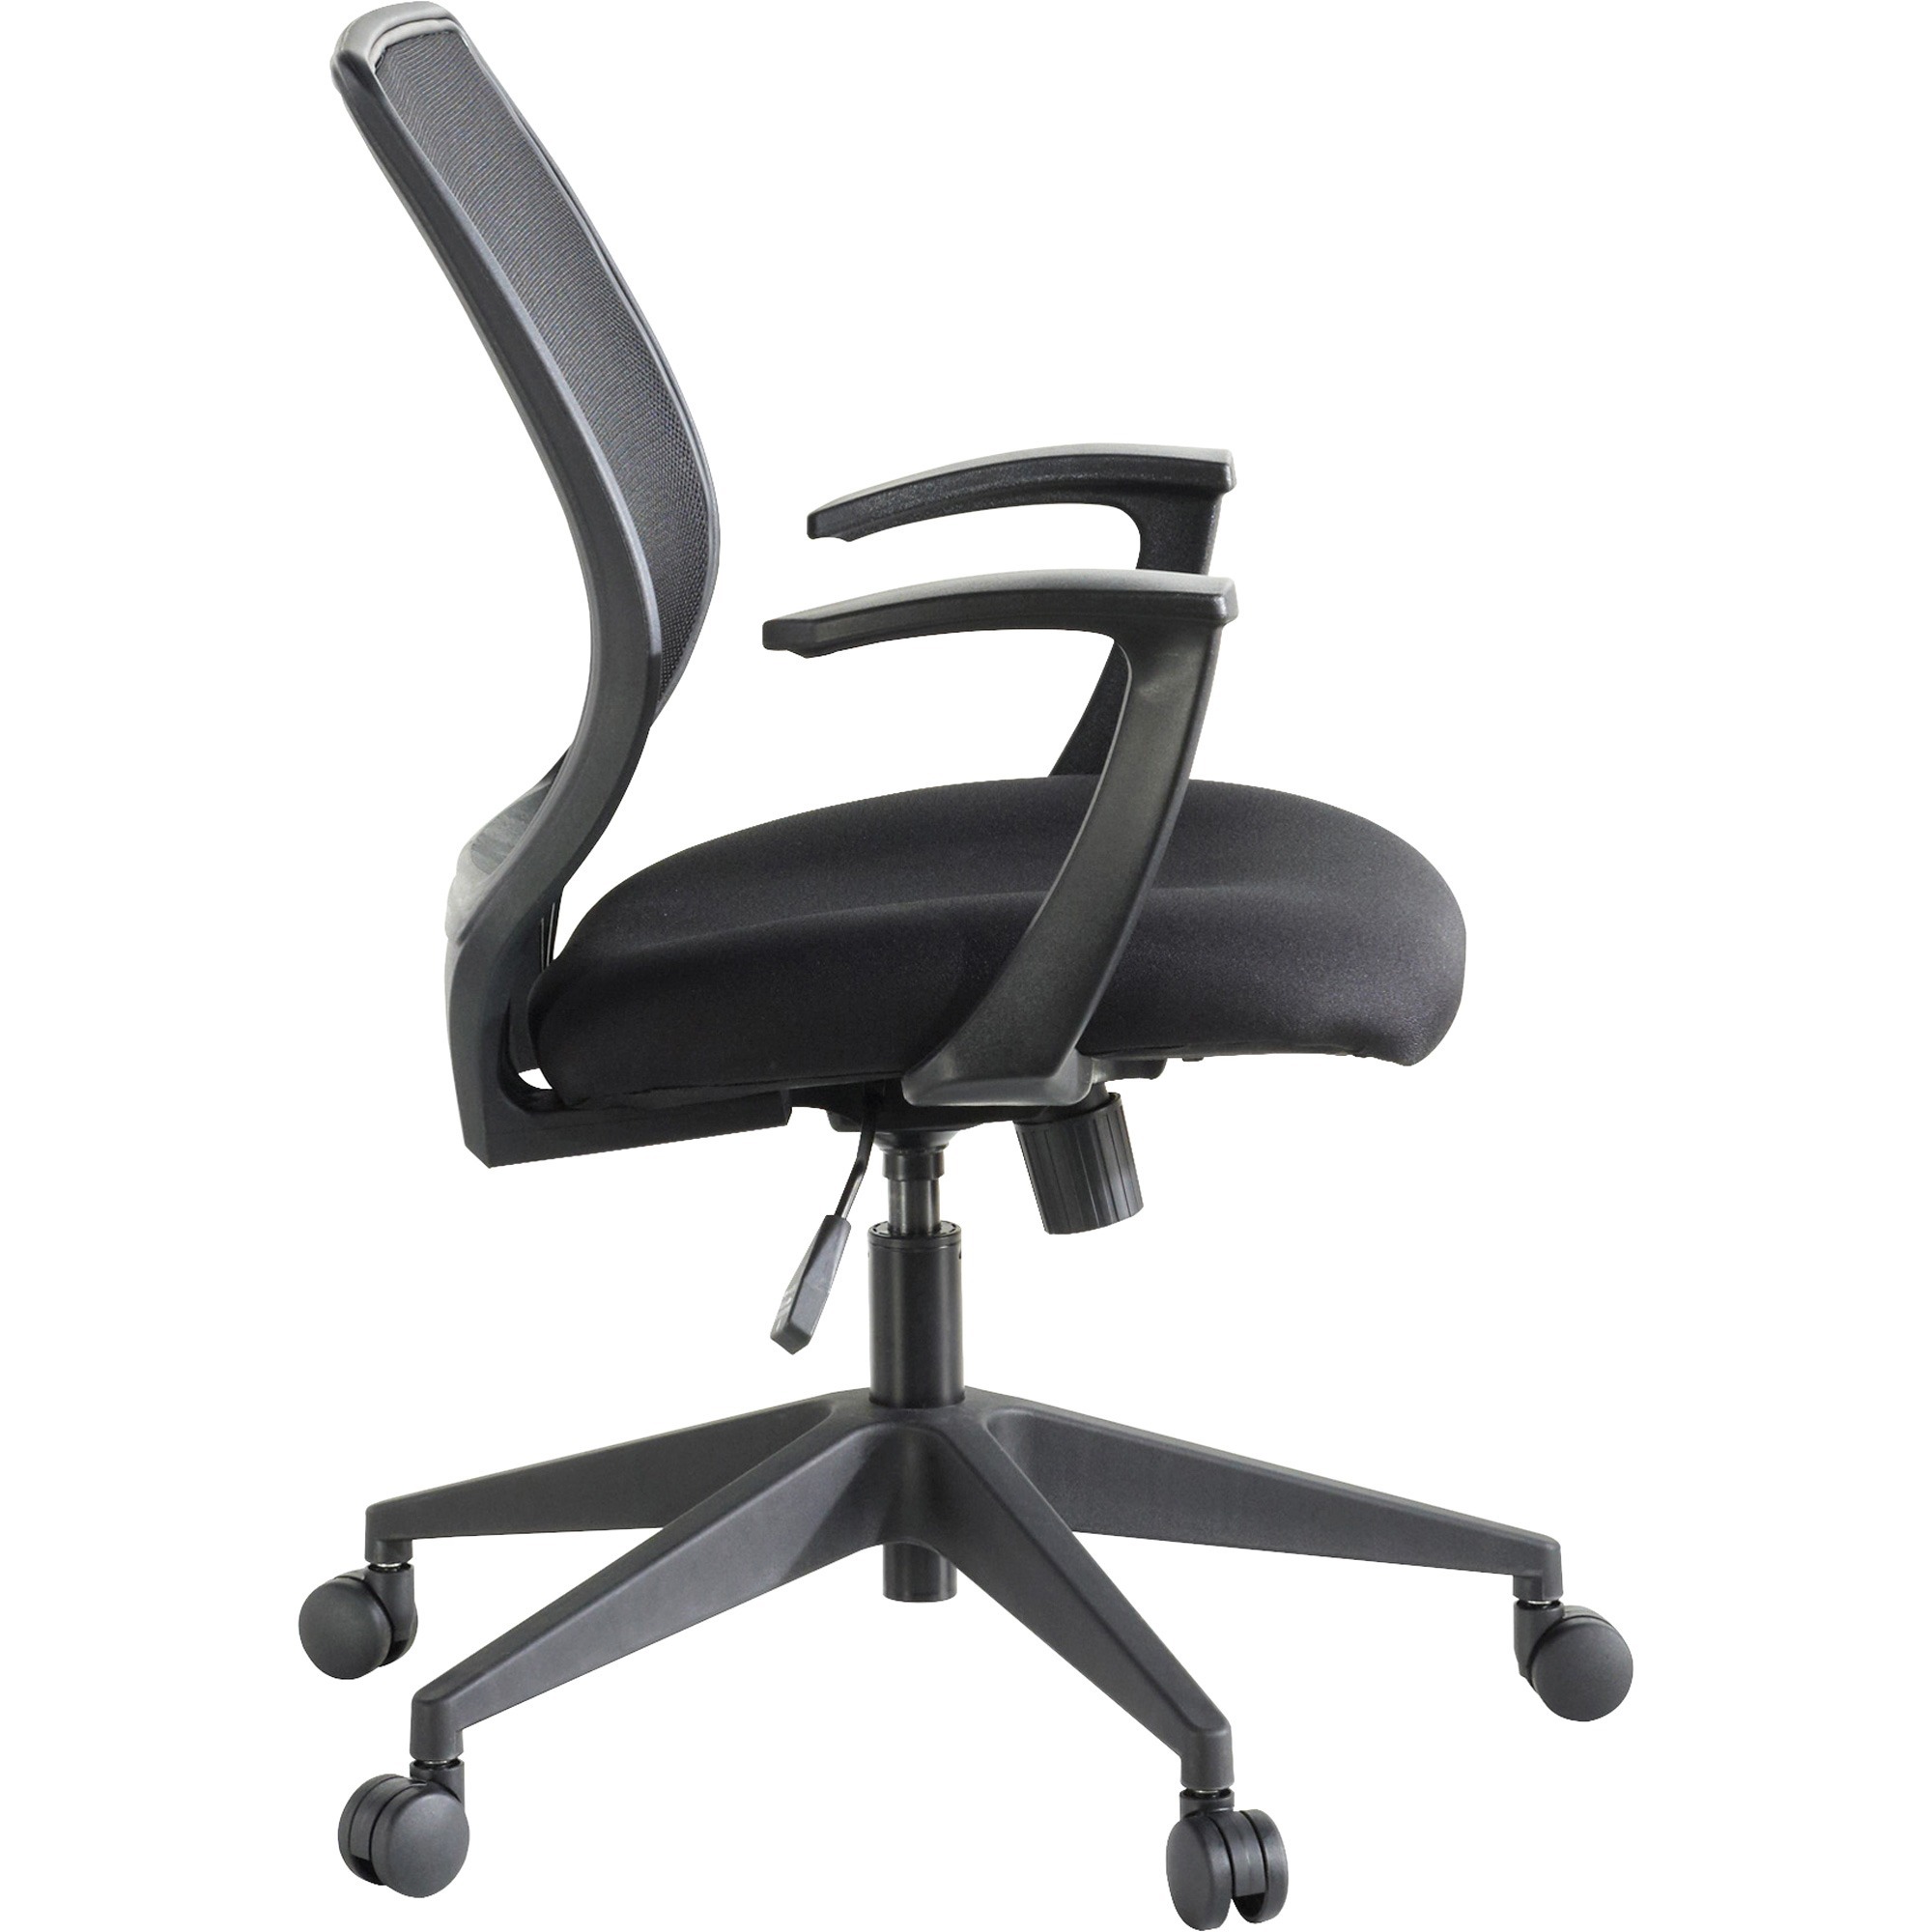 LLR 84868 | Lorell Executive Mid-back Work Chair - Lorell Furniture